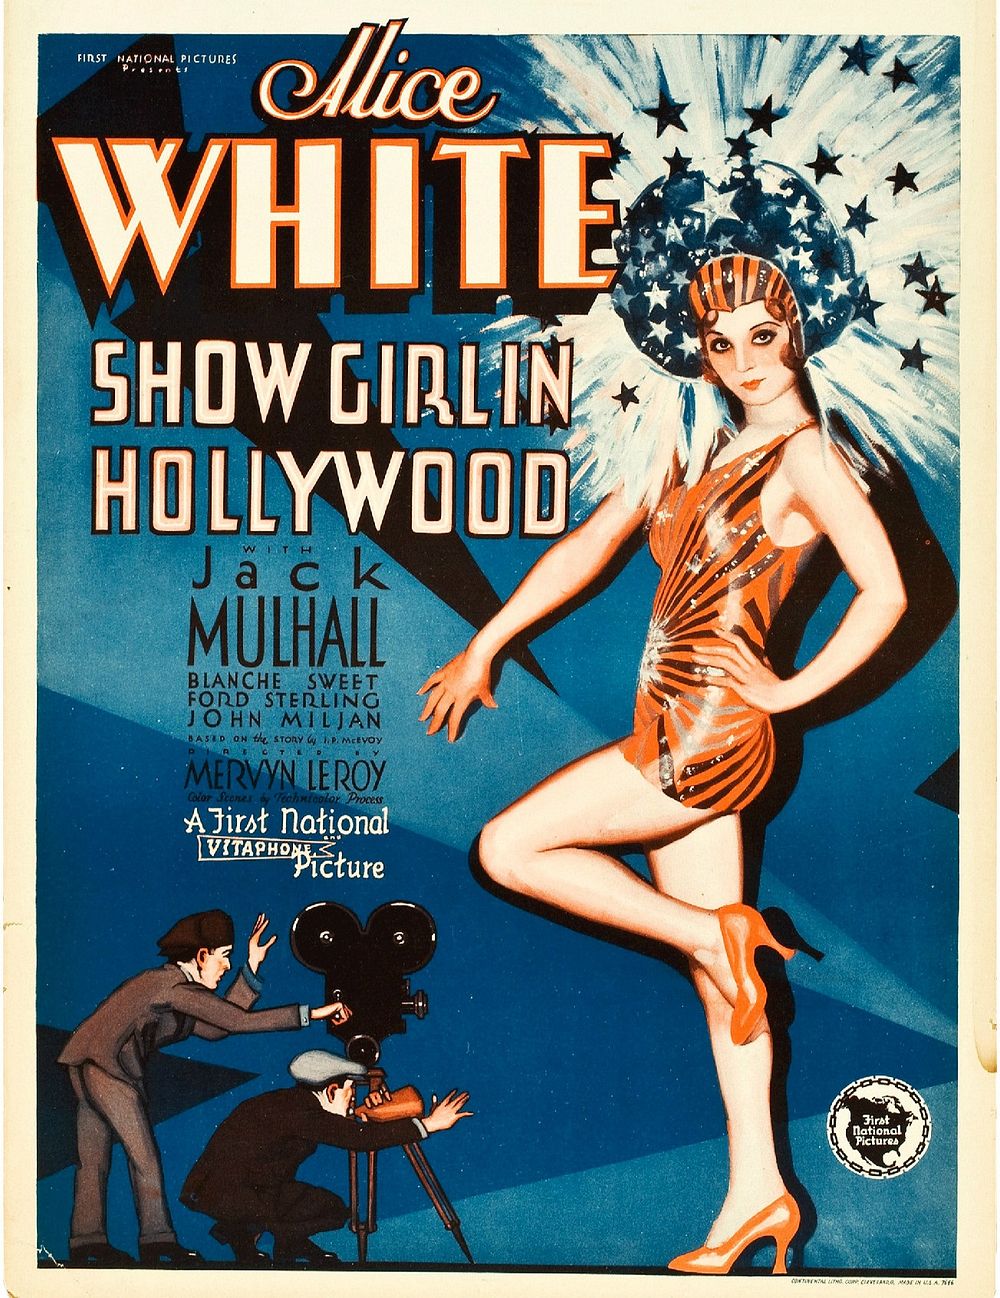 Window poster from the 1930 film Showgirl in Hollywood.